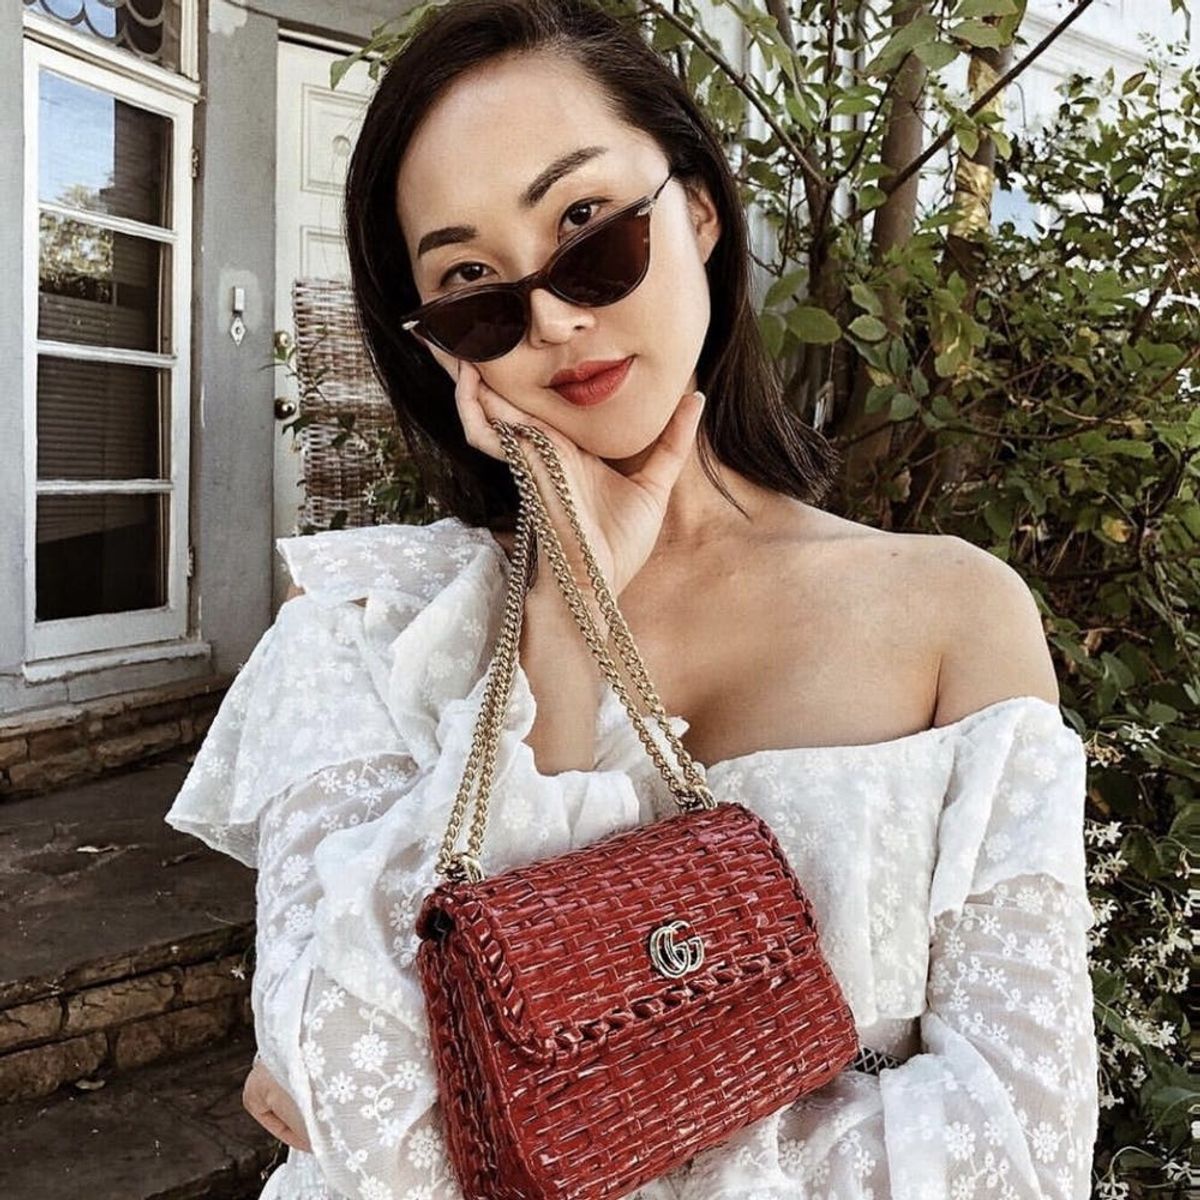 Chriselle Lim on the Red Bag That People Always Ask Her About